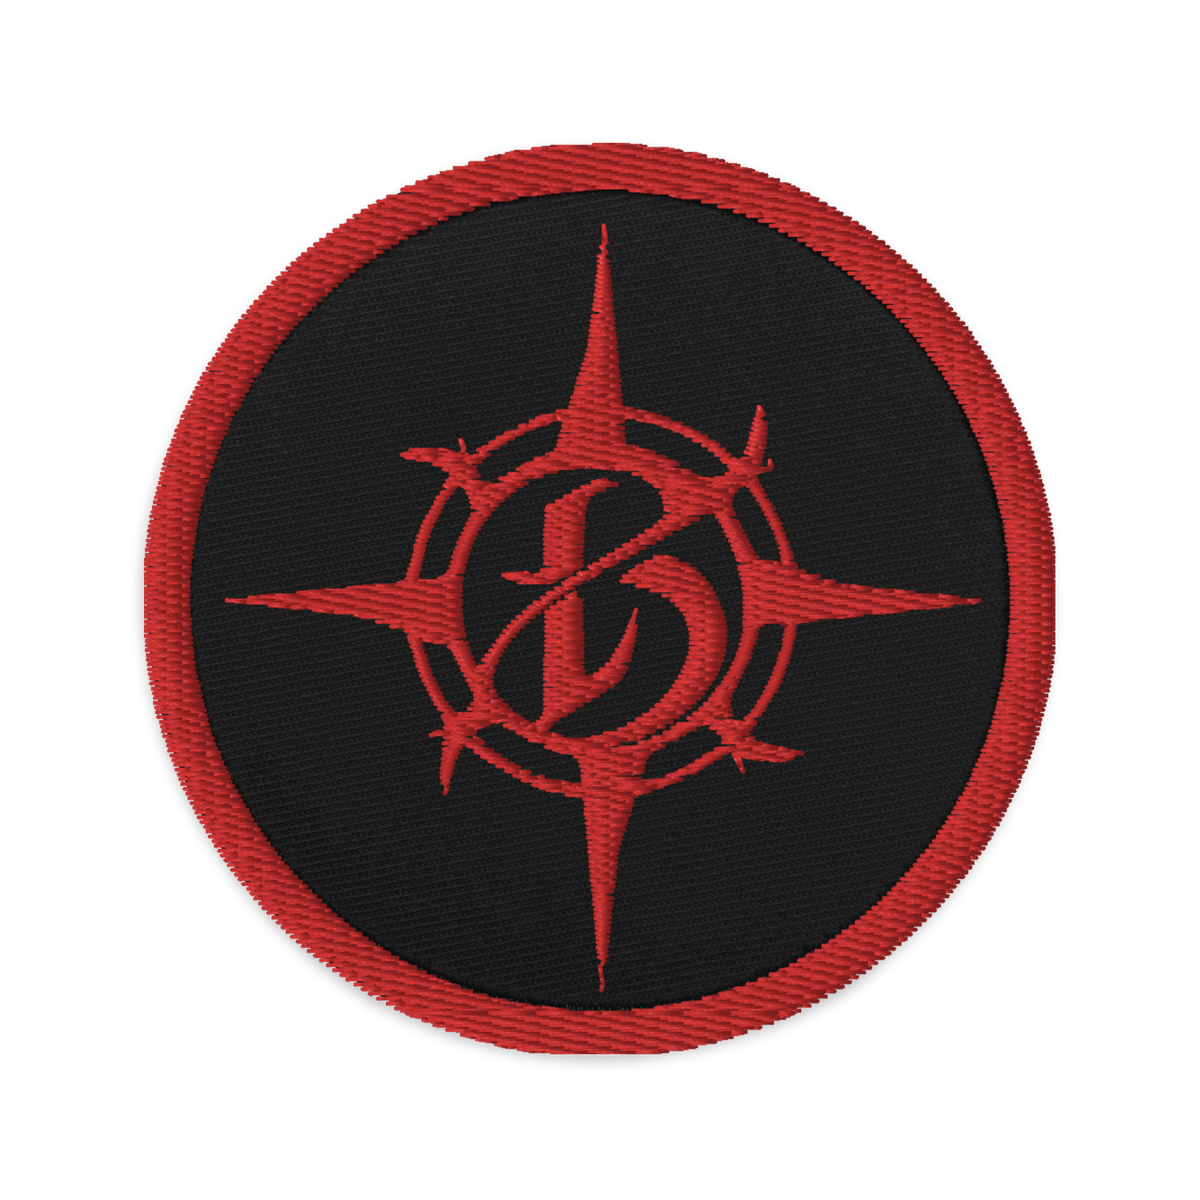 Borealis Compass Logo Embroidered Patch - Red